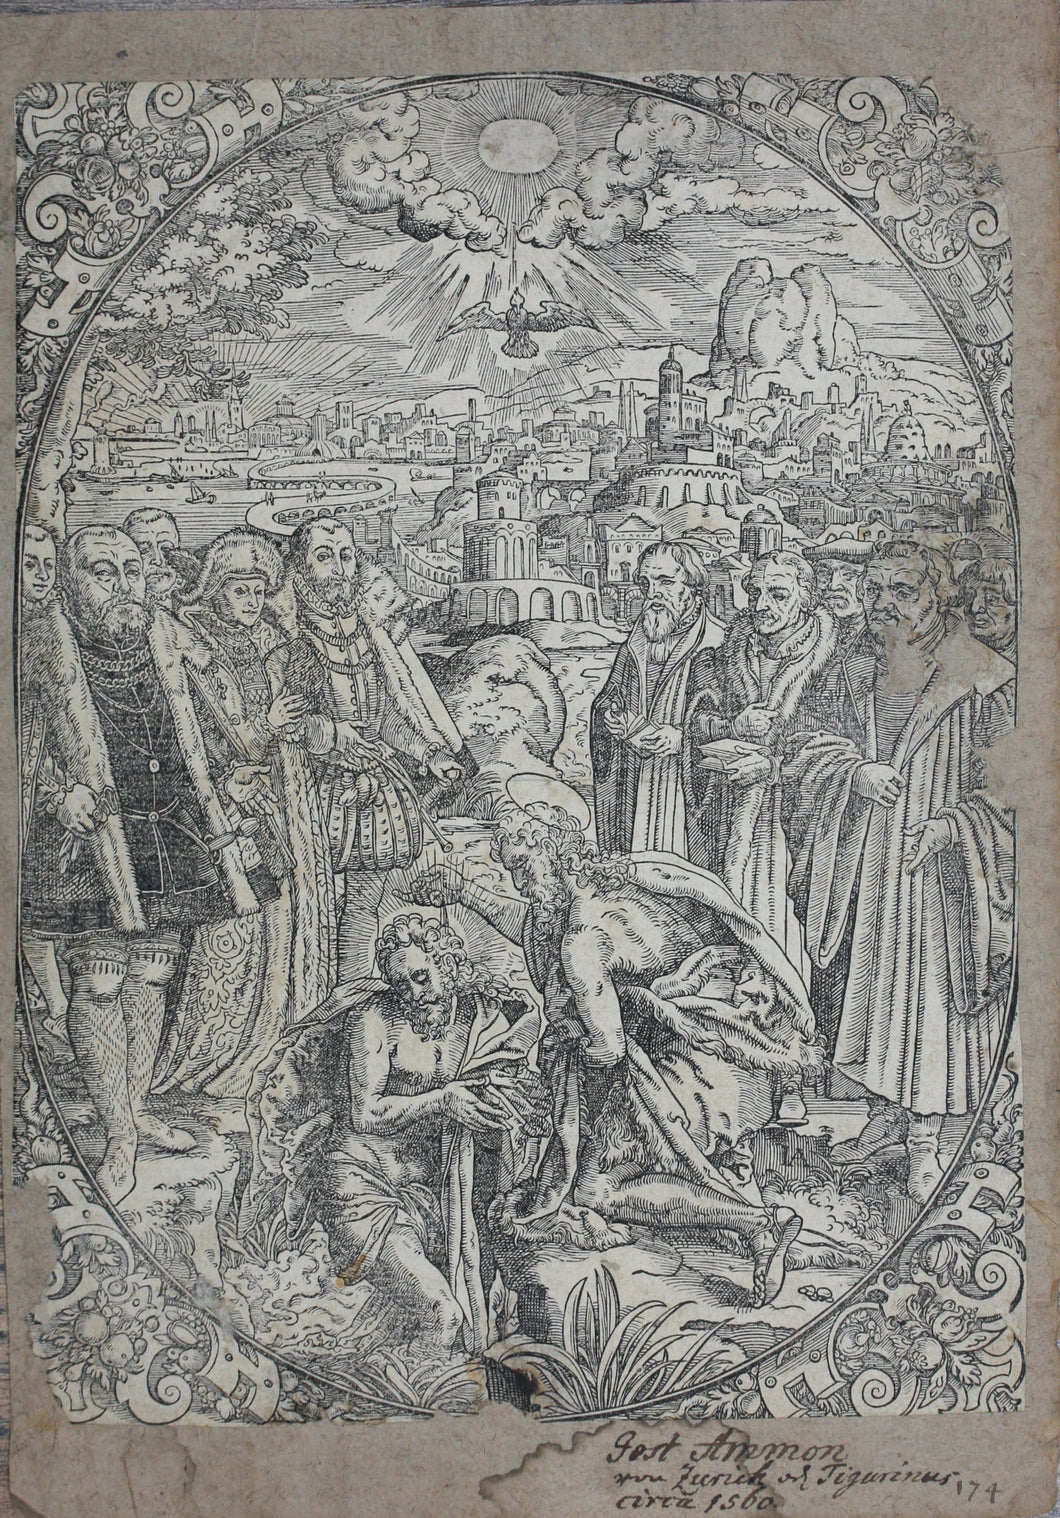 Tobias Stimmer (possibly), after. Baptism of Christ. Woodcut by Jost Amman. C. 1560.